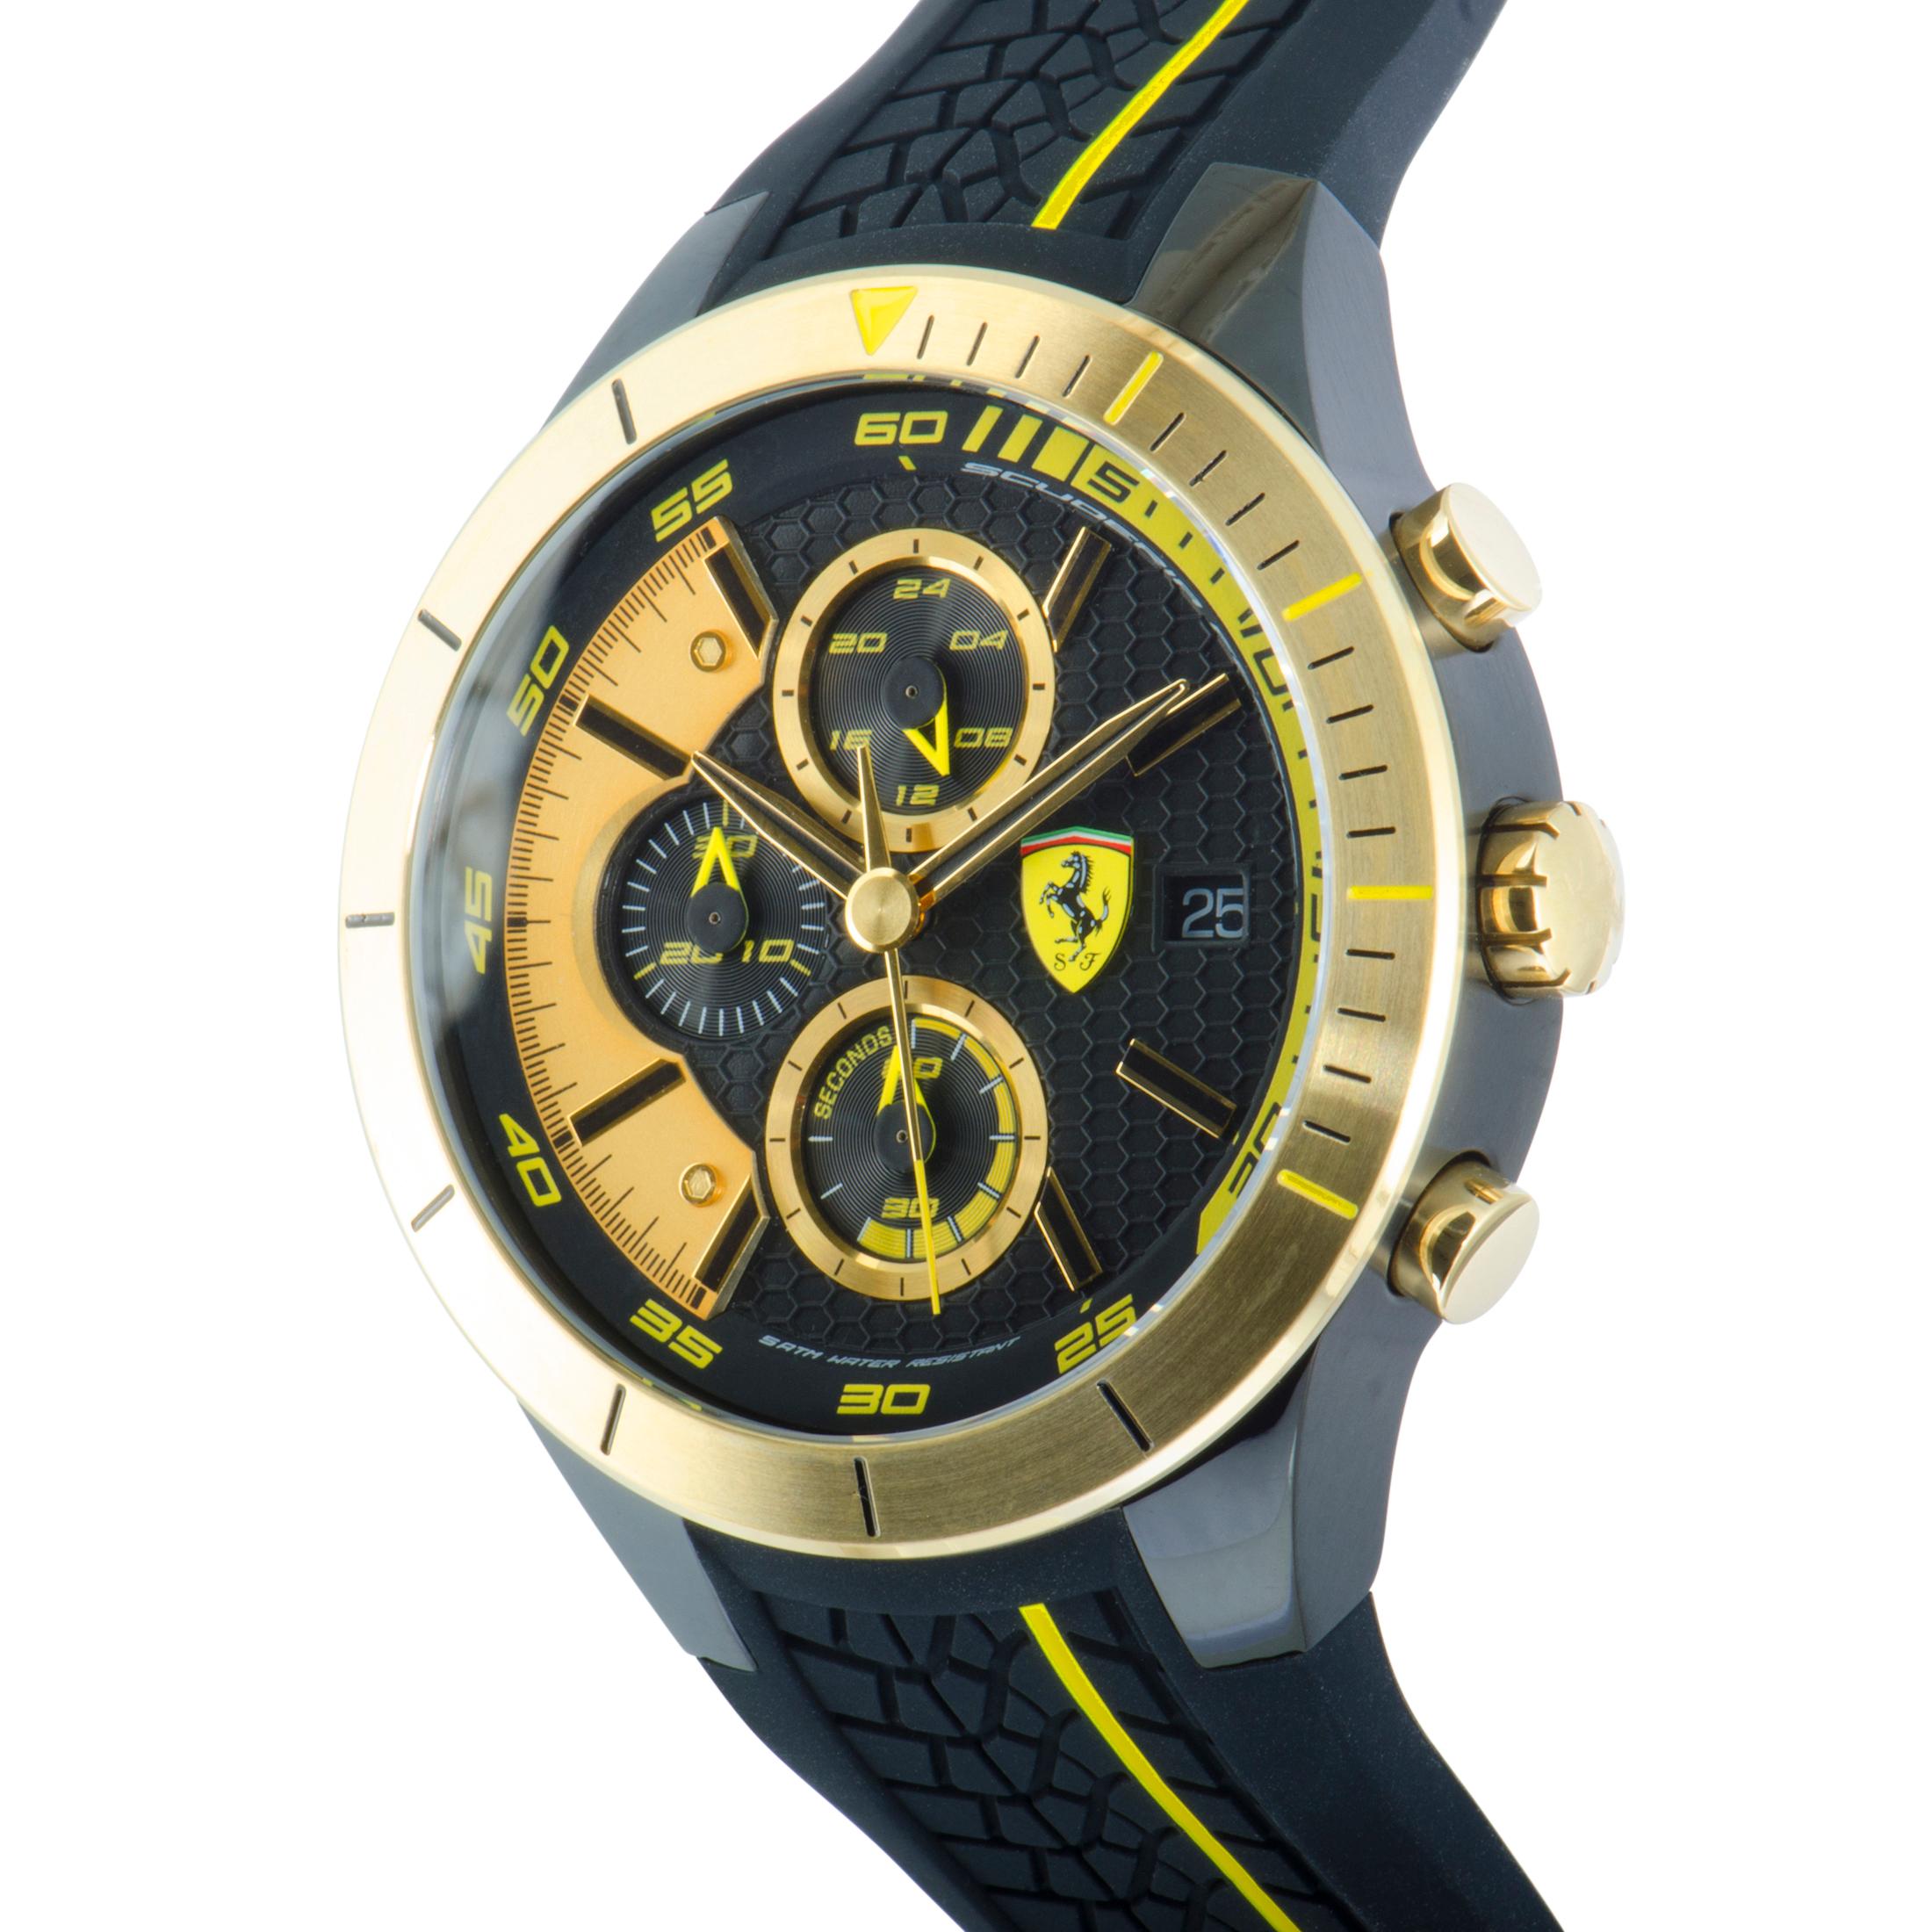 A perfect choice for admirers of fine watchmaking who are also automotive sports enthusiasts, this magnificent timepiece from Scuderia Ferrari carries on the brand’s timeless legacy while ensuring remarkable practicality and great precision in a